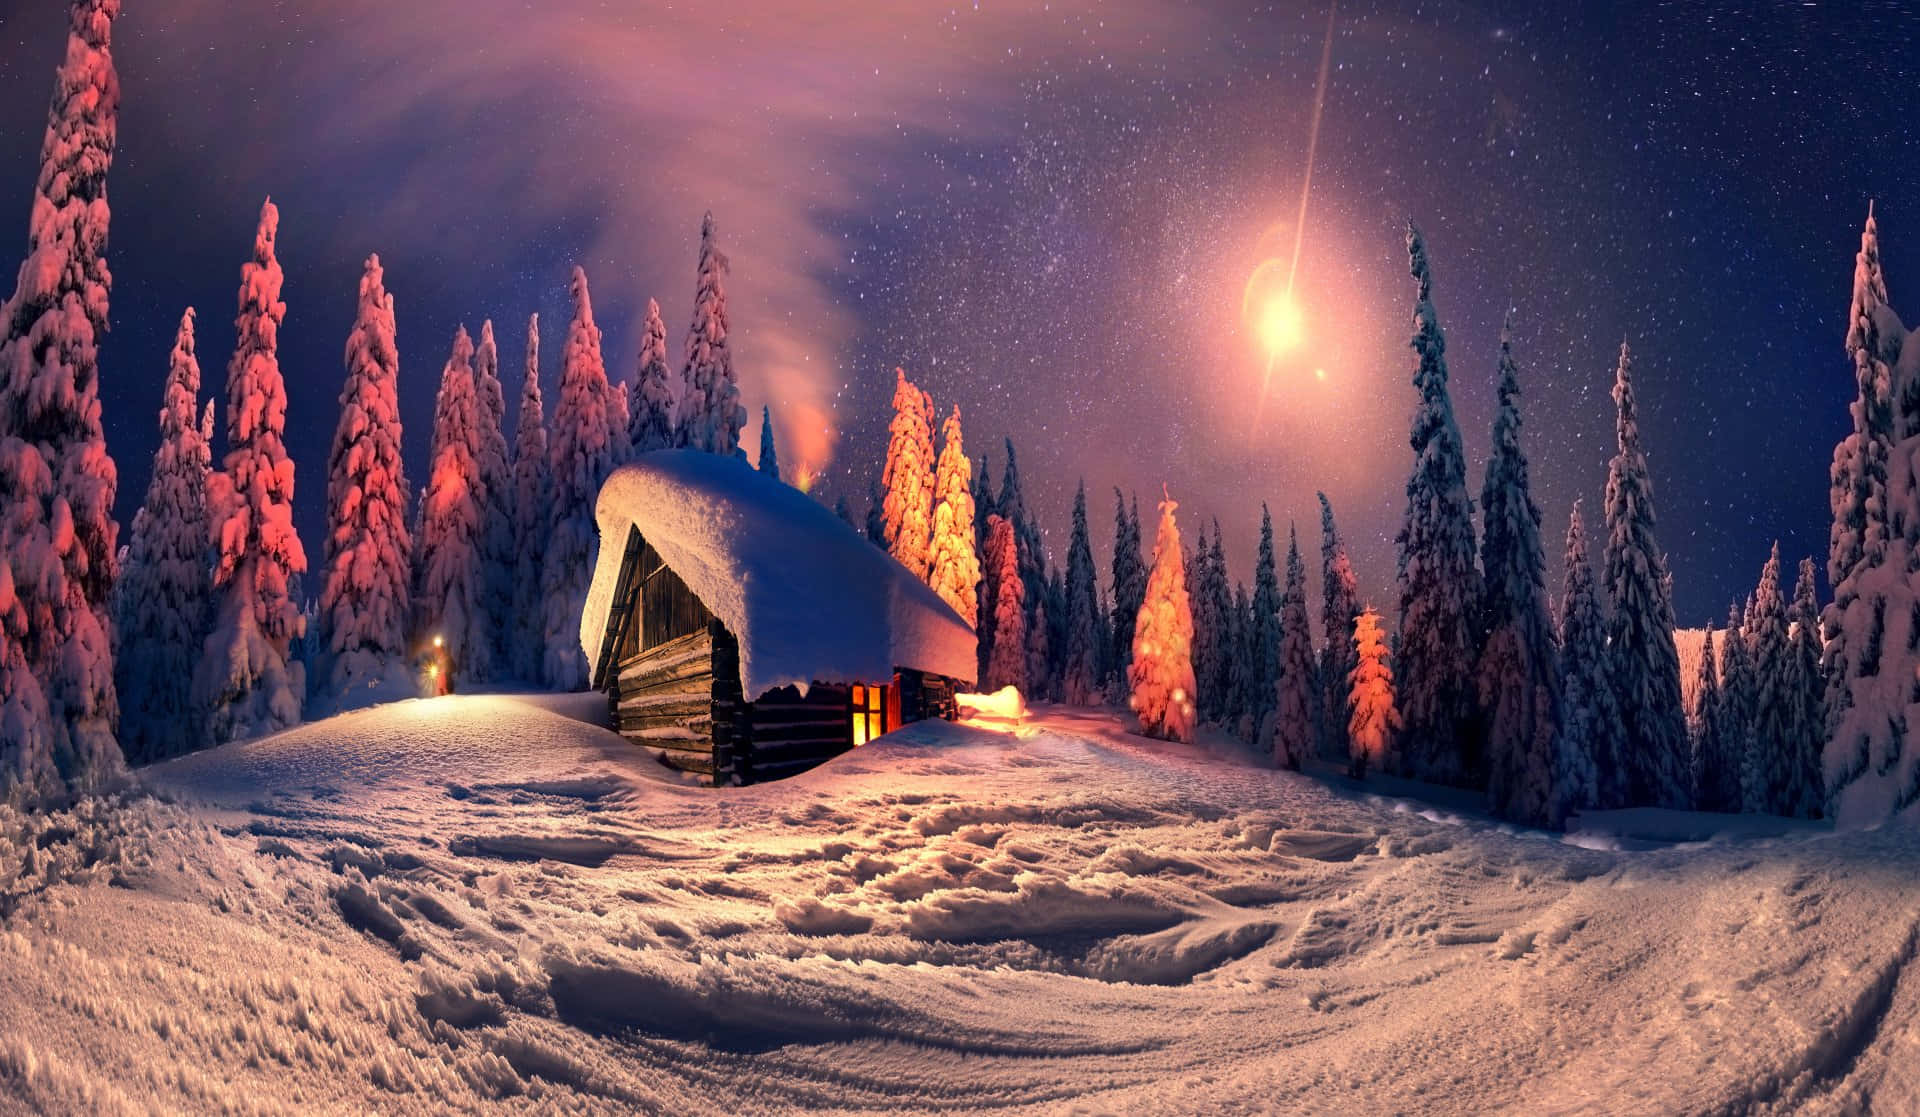 Discover the magic of nature in a cozy hut.